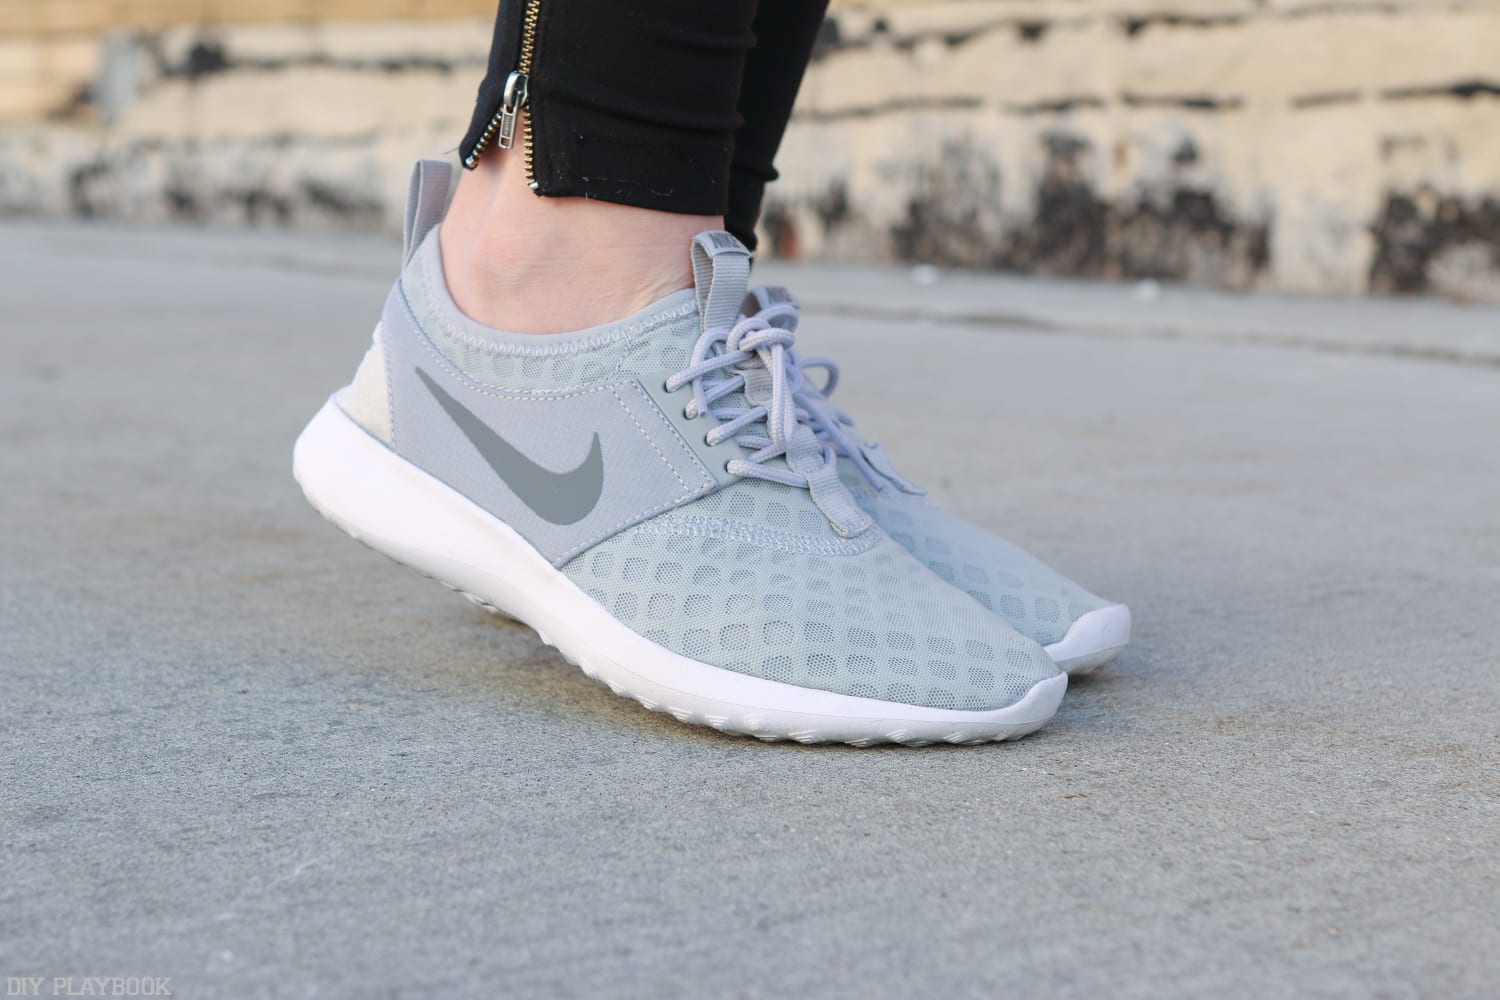 Shoes: Workout Accessories & Fitness Goals for 2017 | DIY Playbook